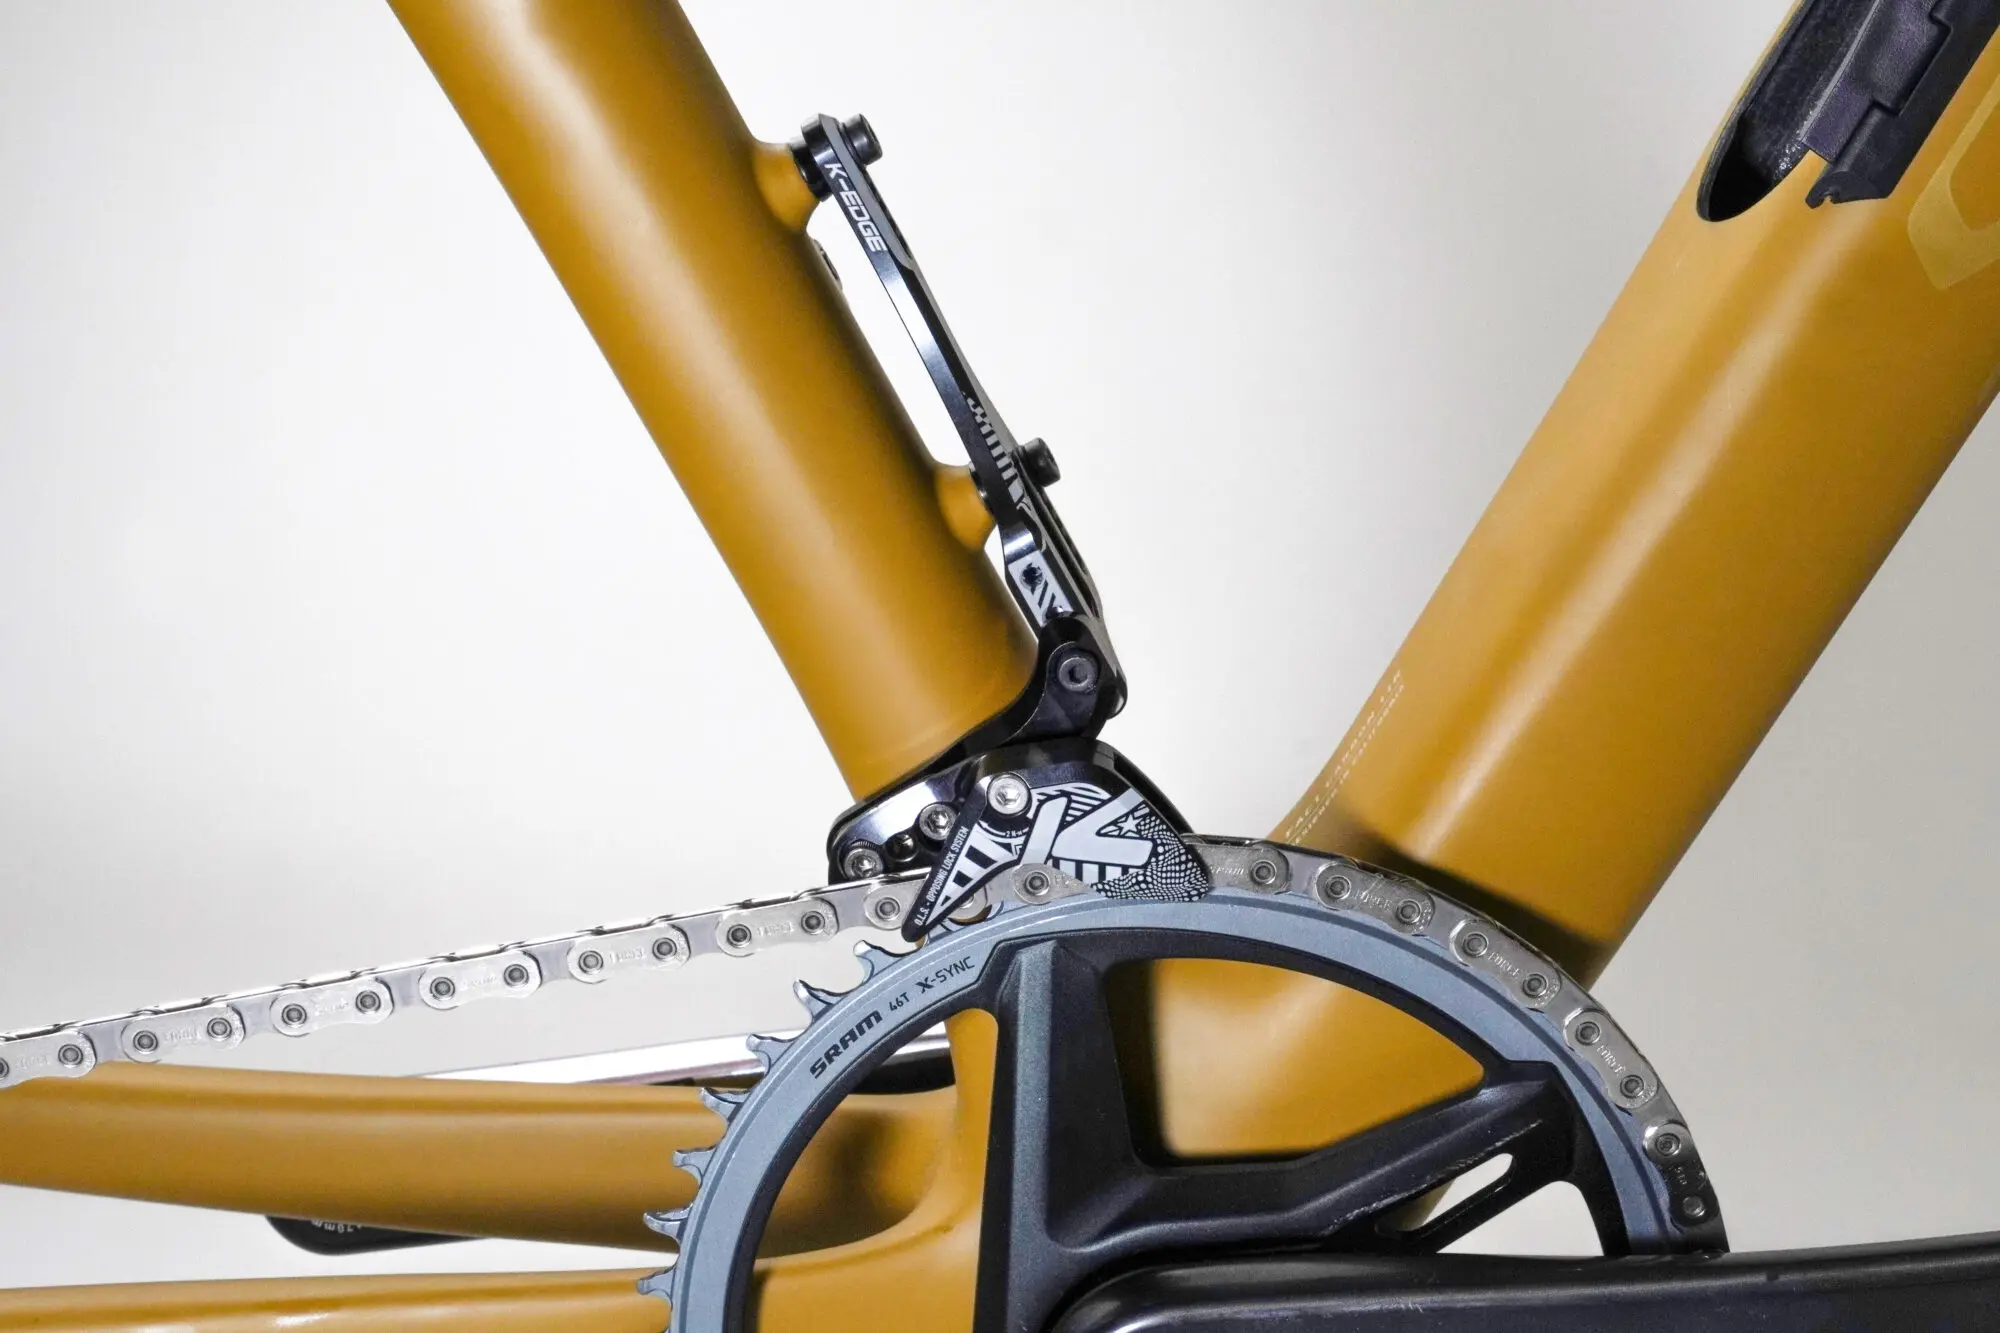 No More Dropped Chains: Introducing the K-EDGE 1x Race W Chain Guide